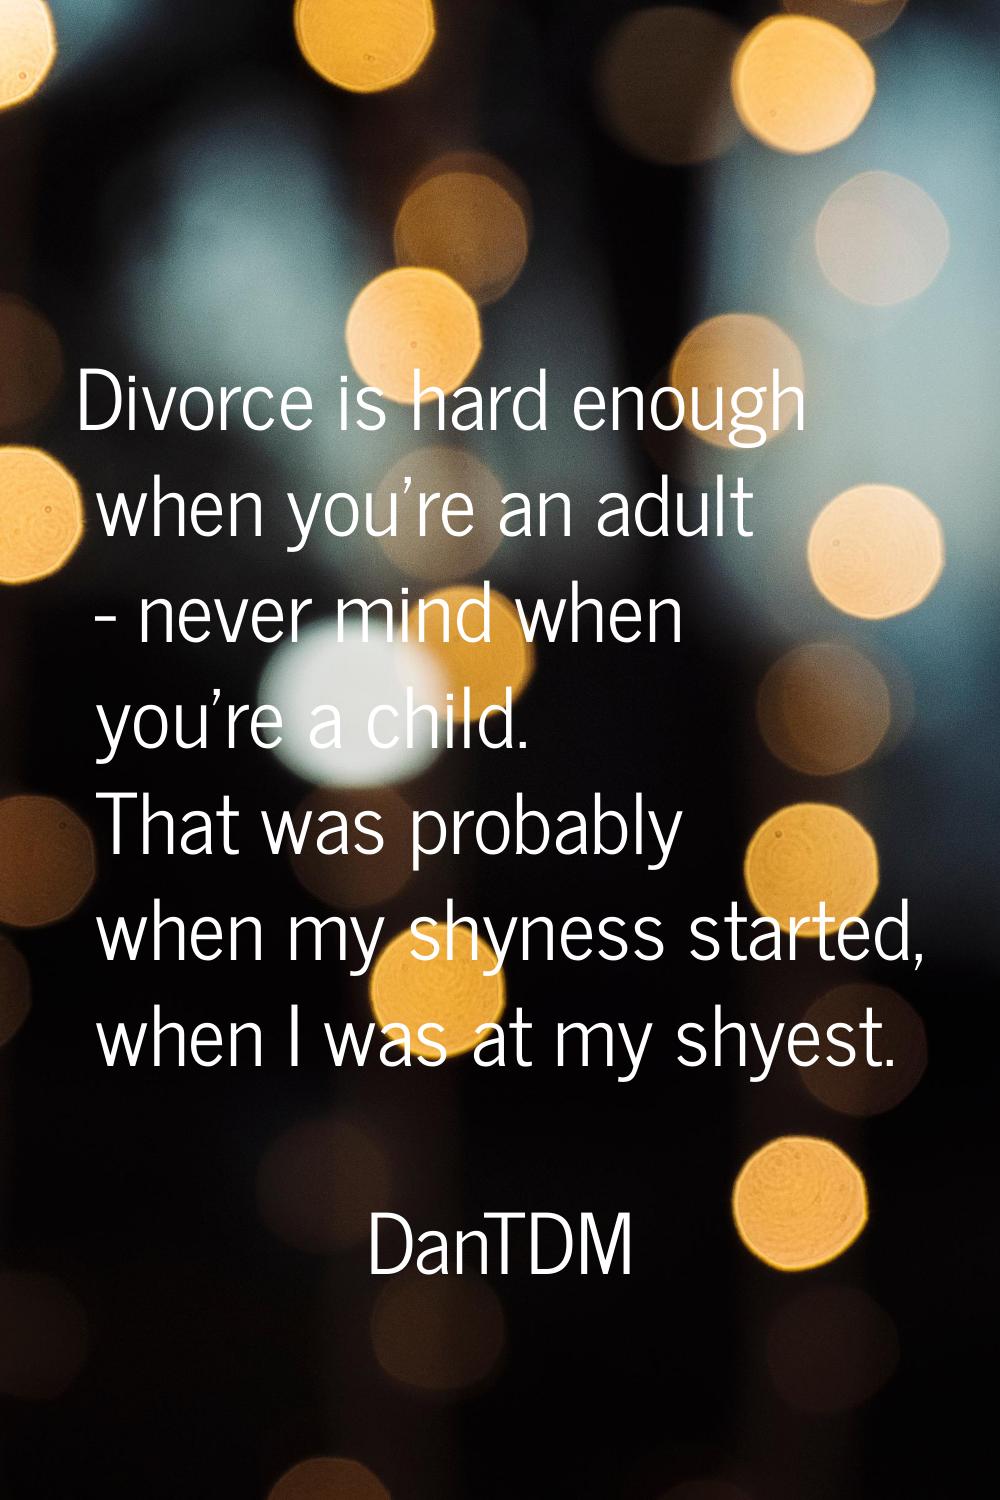 Divorce is hard enough when you're an adult - never mind when you're a child. That was probably whe